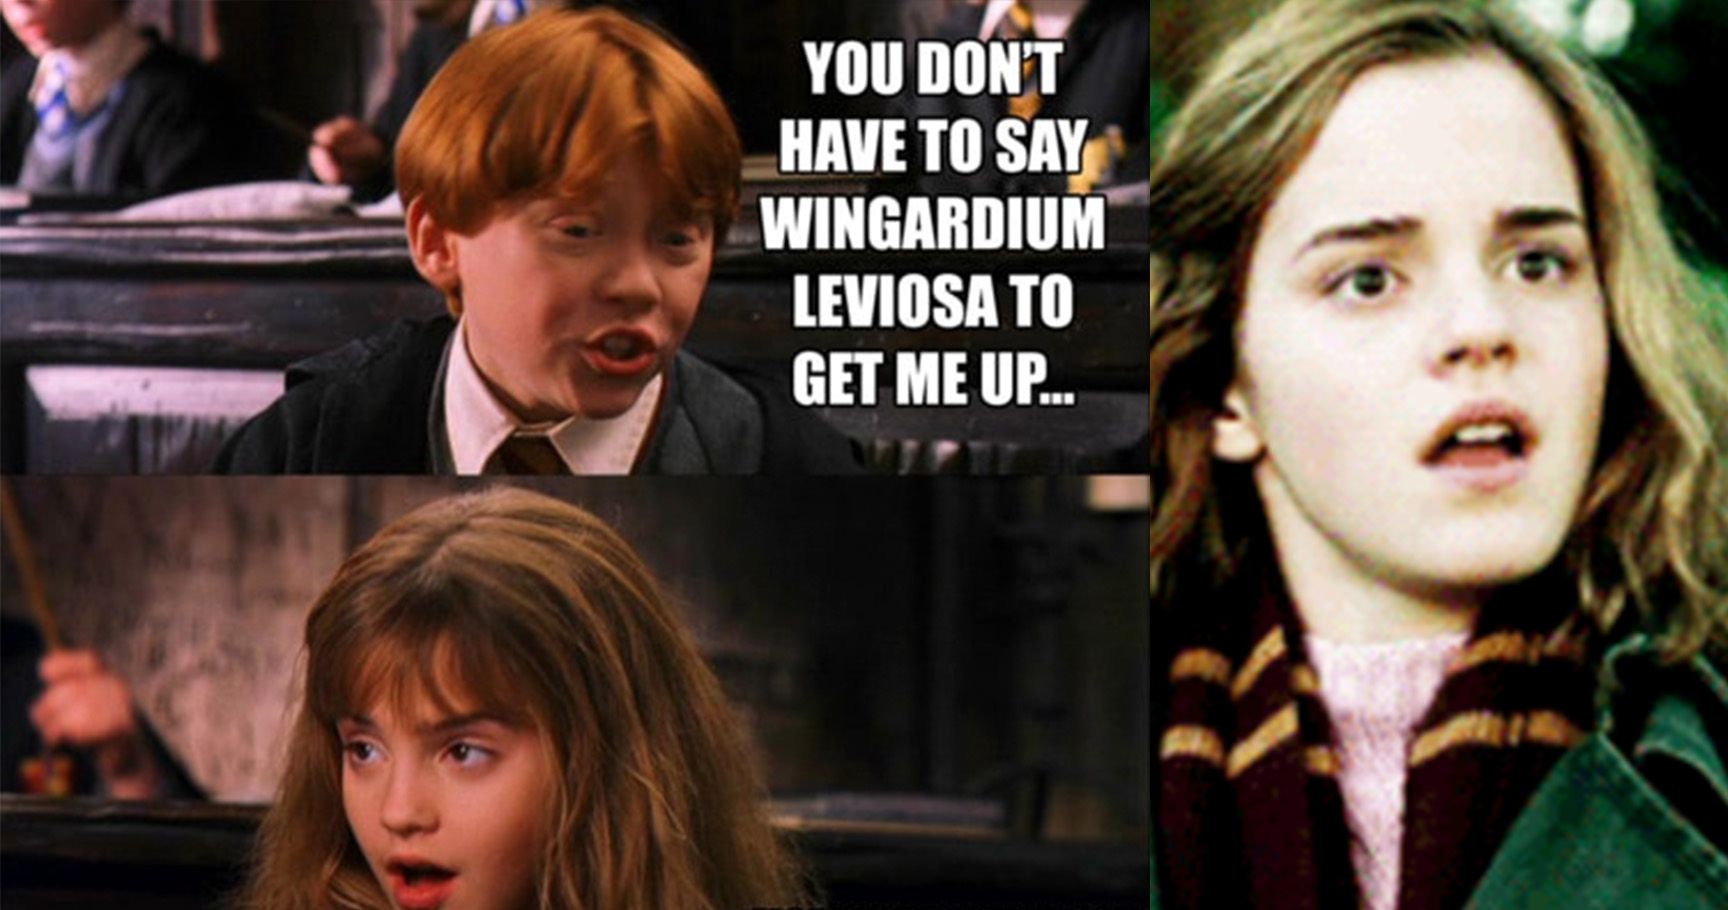 15 More Hilariously Inappropriate Harry Potter Memes That Will Make You Lol